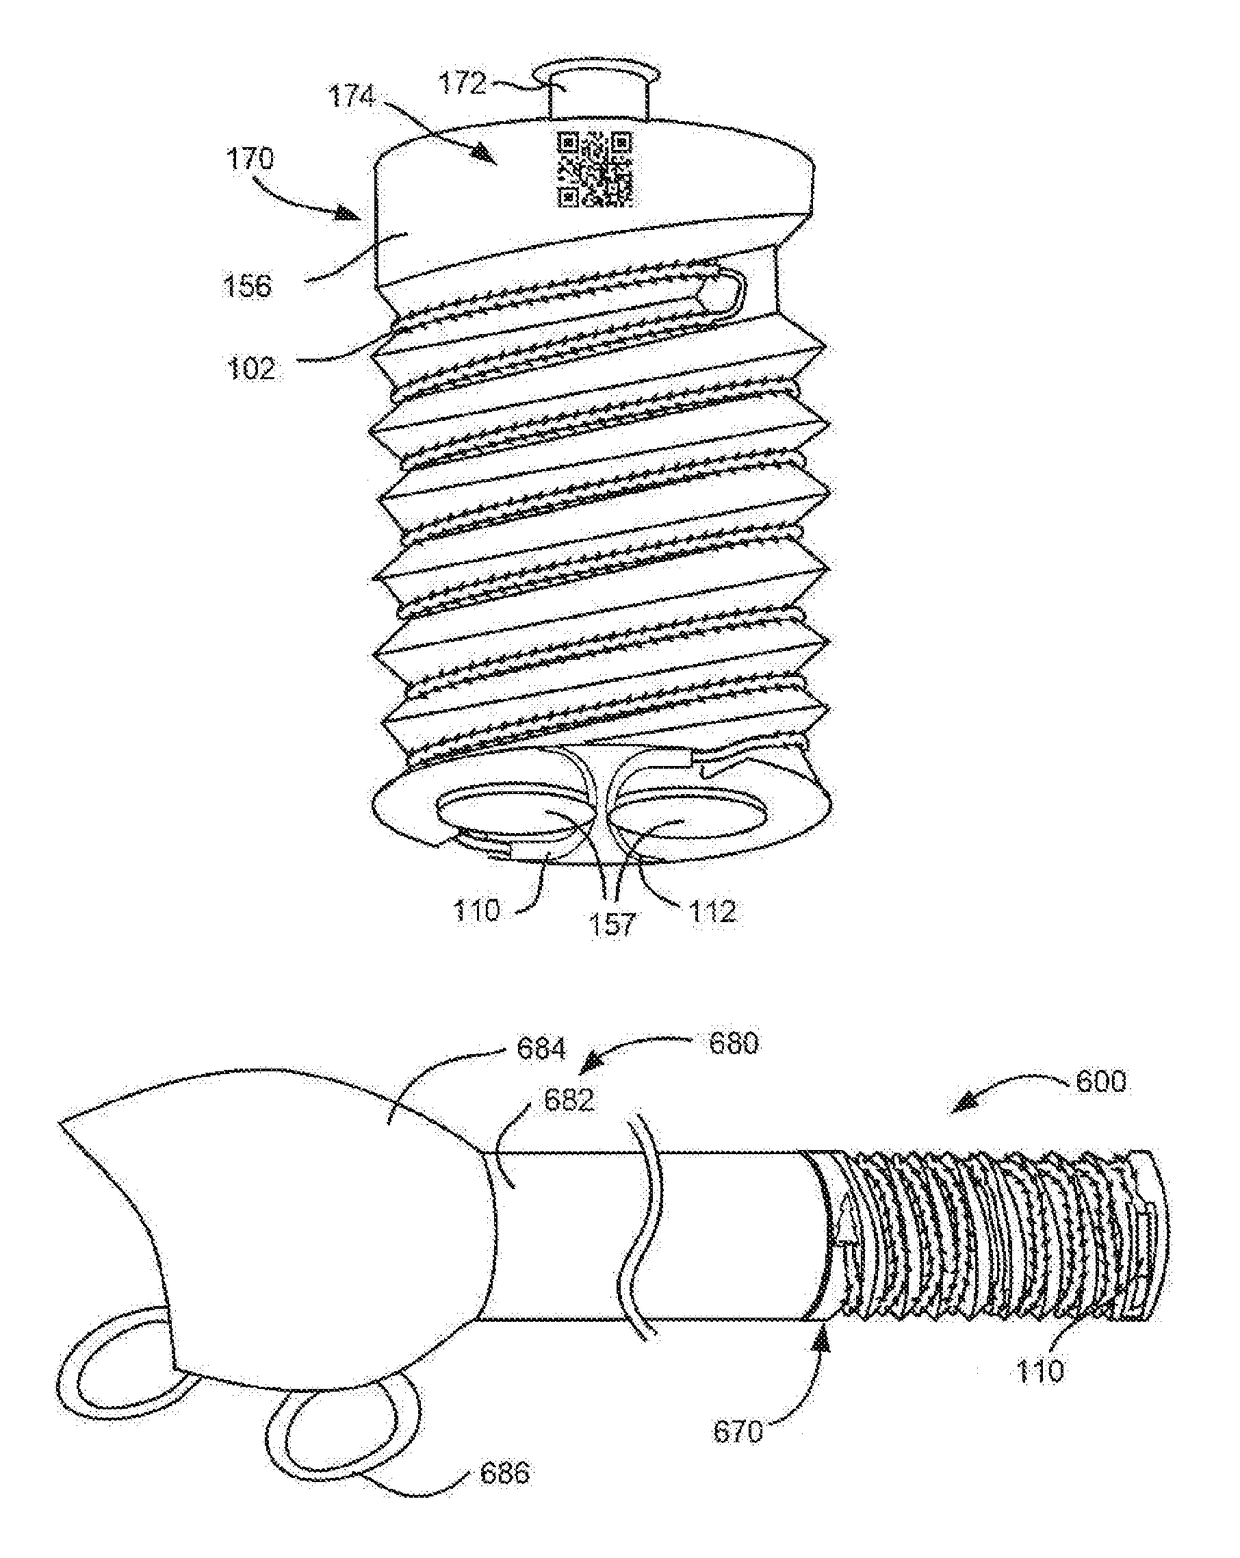 Suture delivery tools for endoscopic and robot-assisted surgery and methods